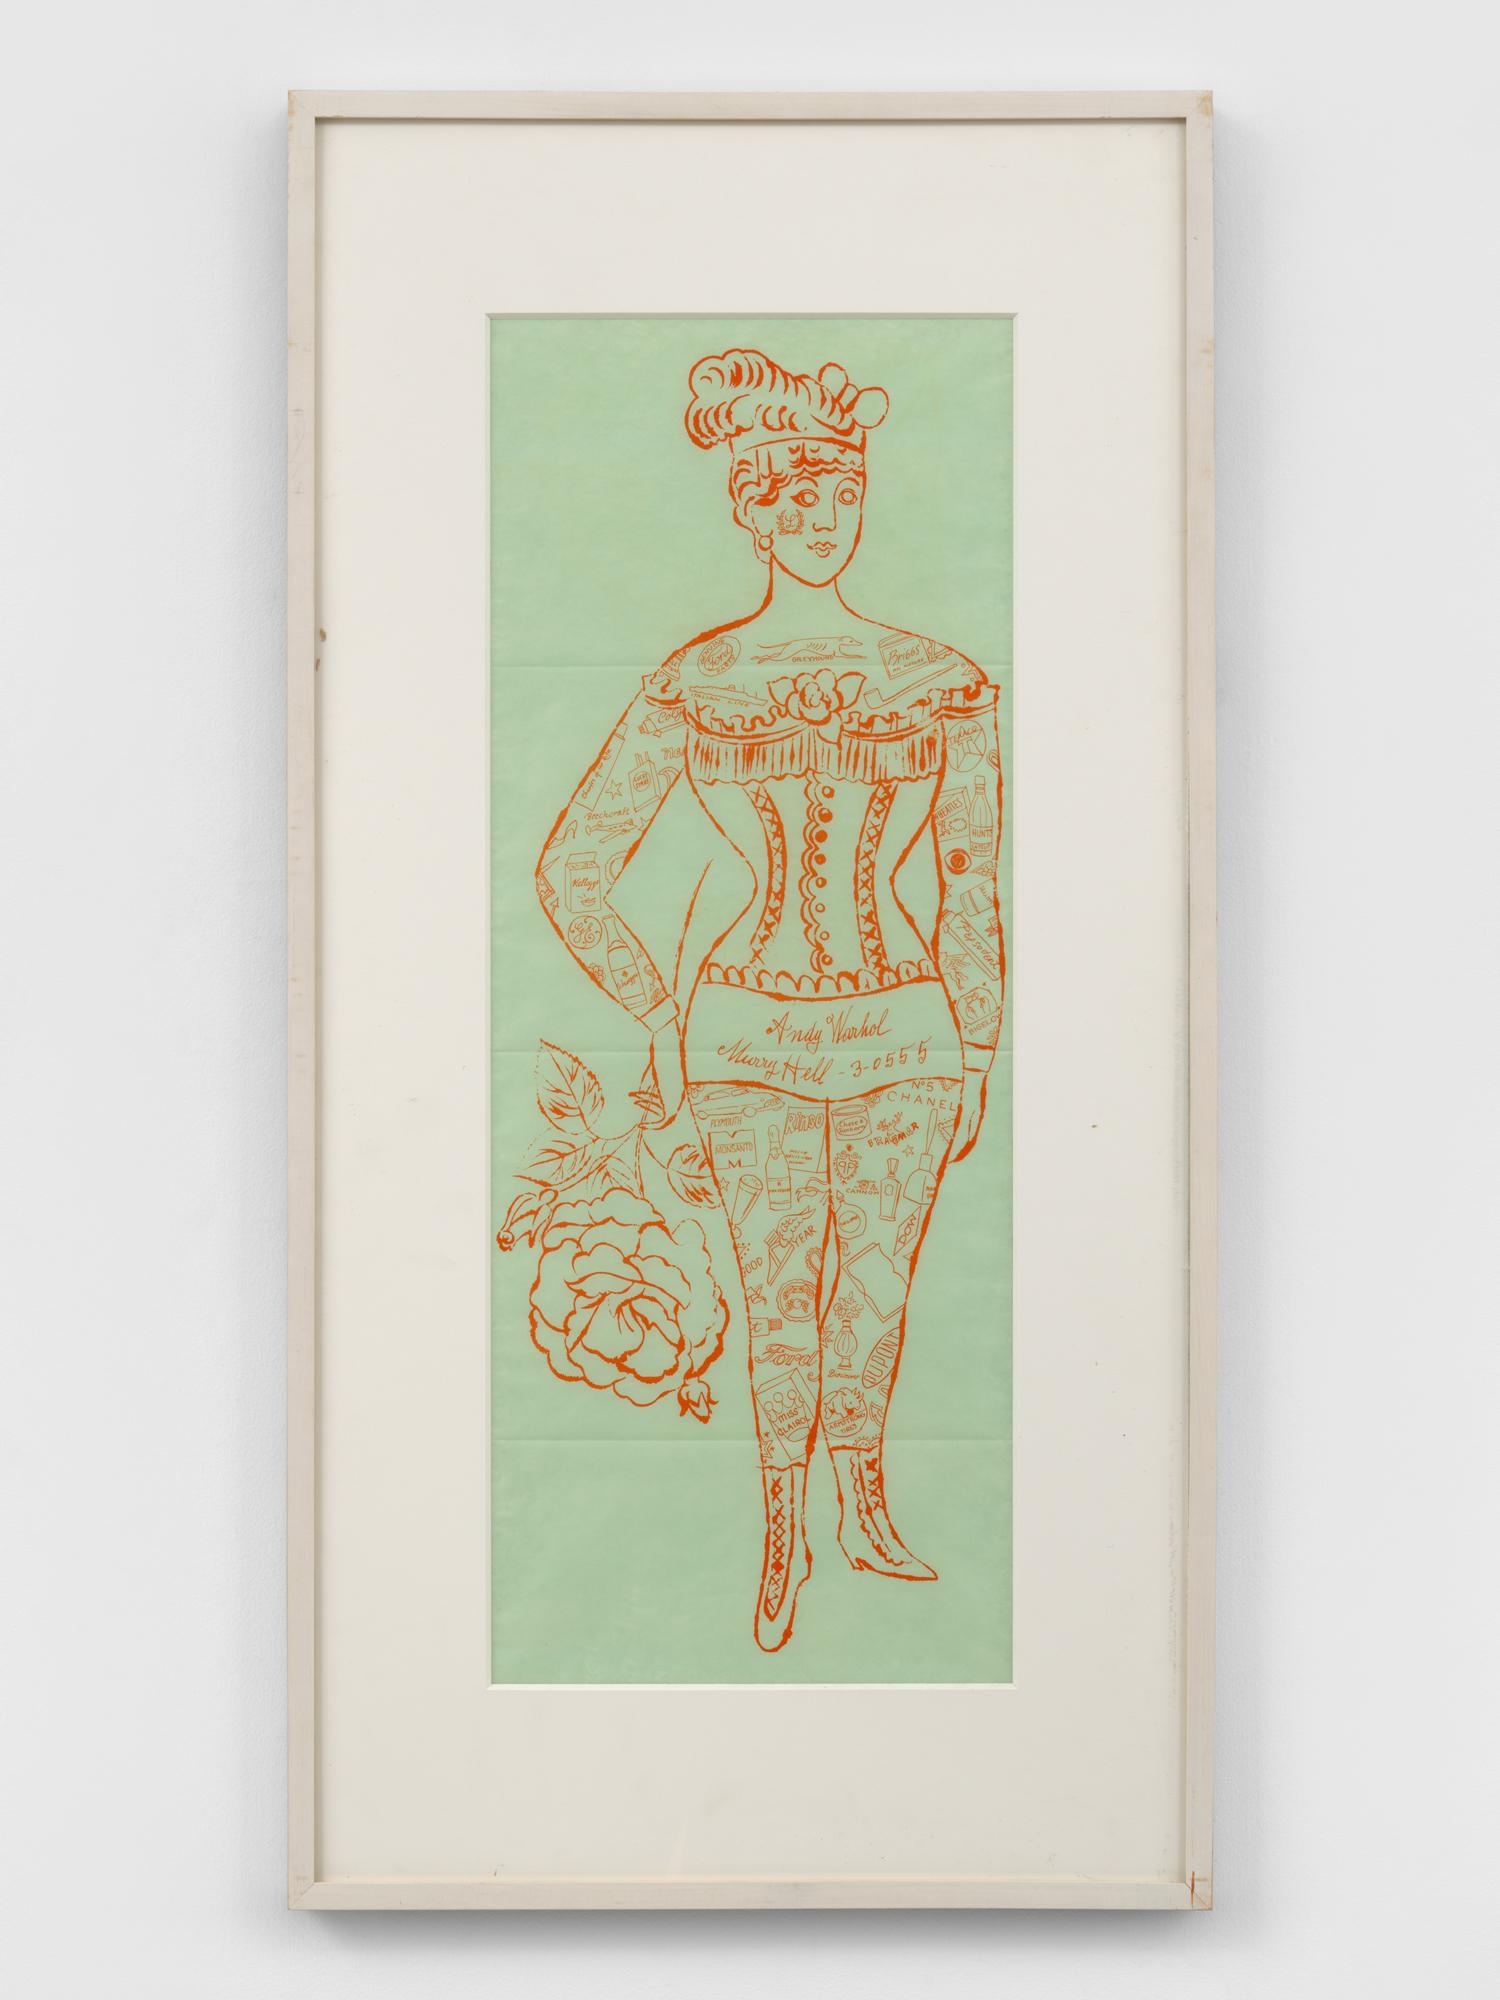 Tattooed Woman Holding Rose - Print by Andy Warhol